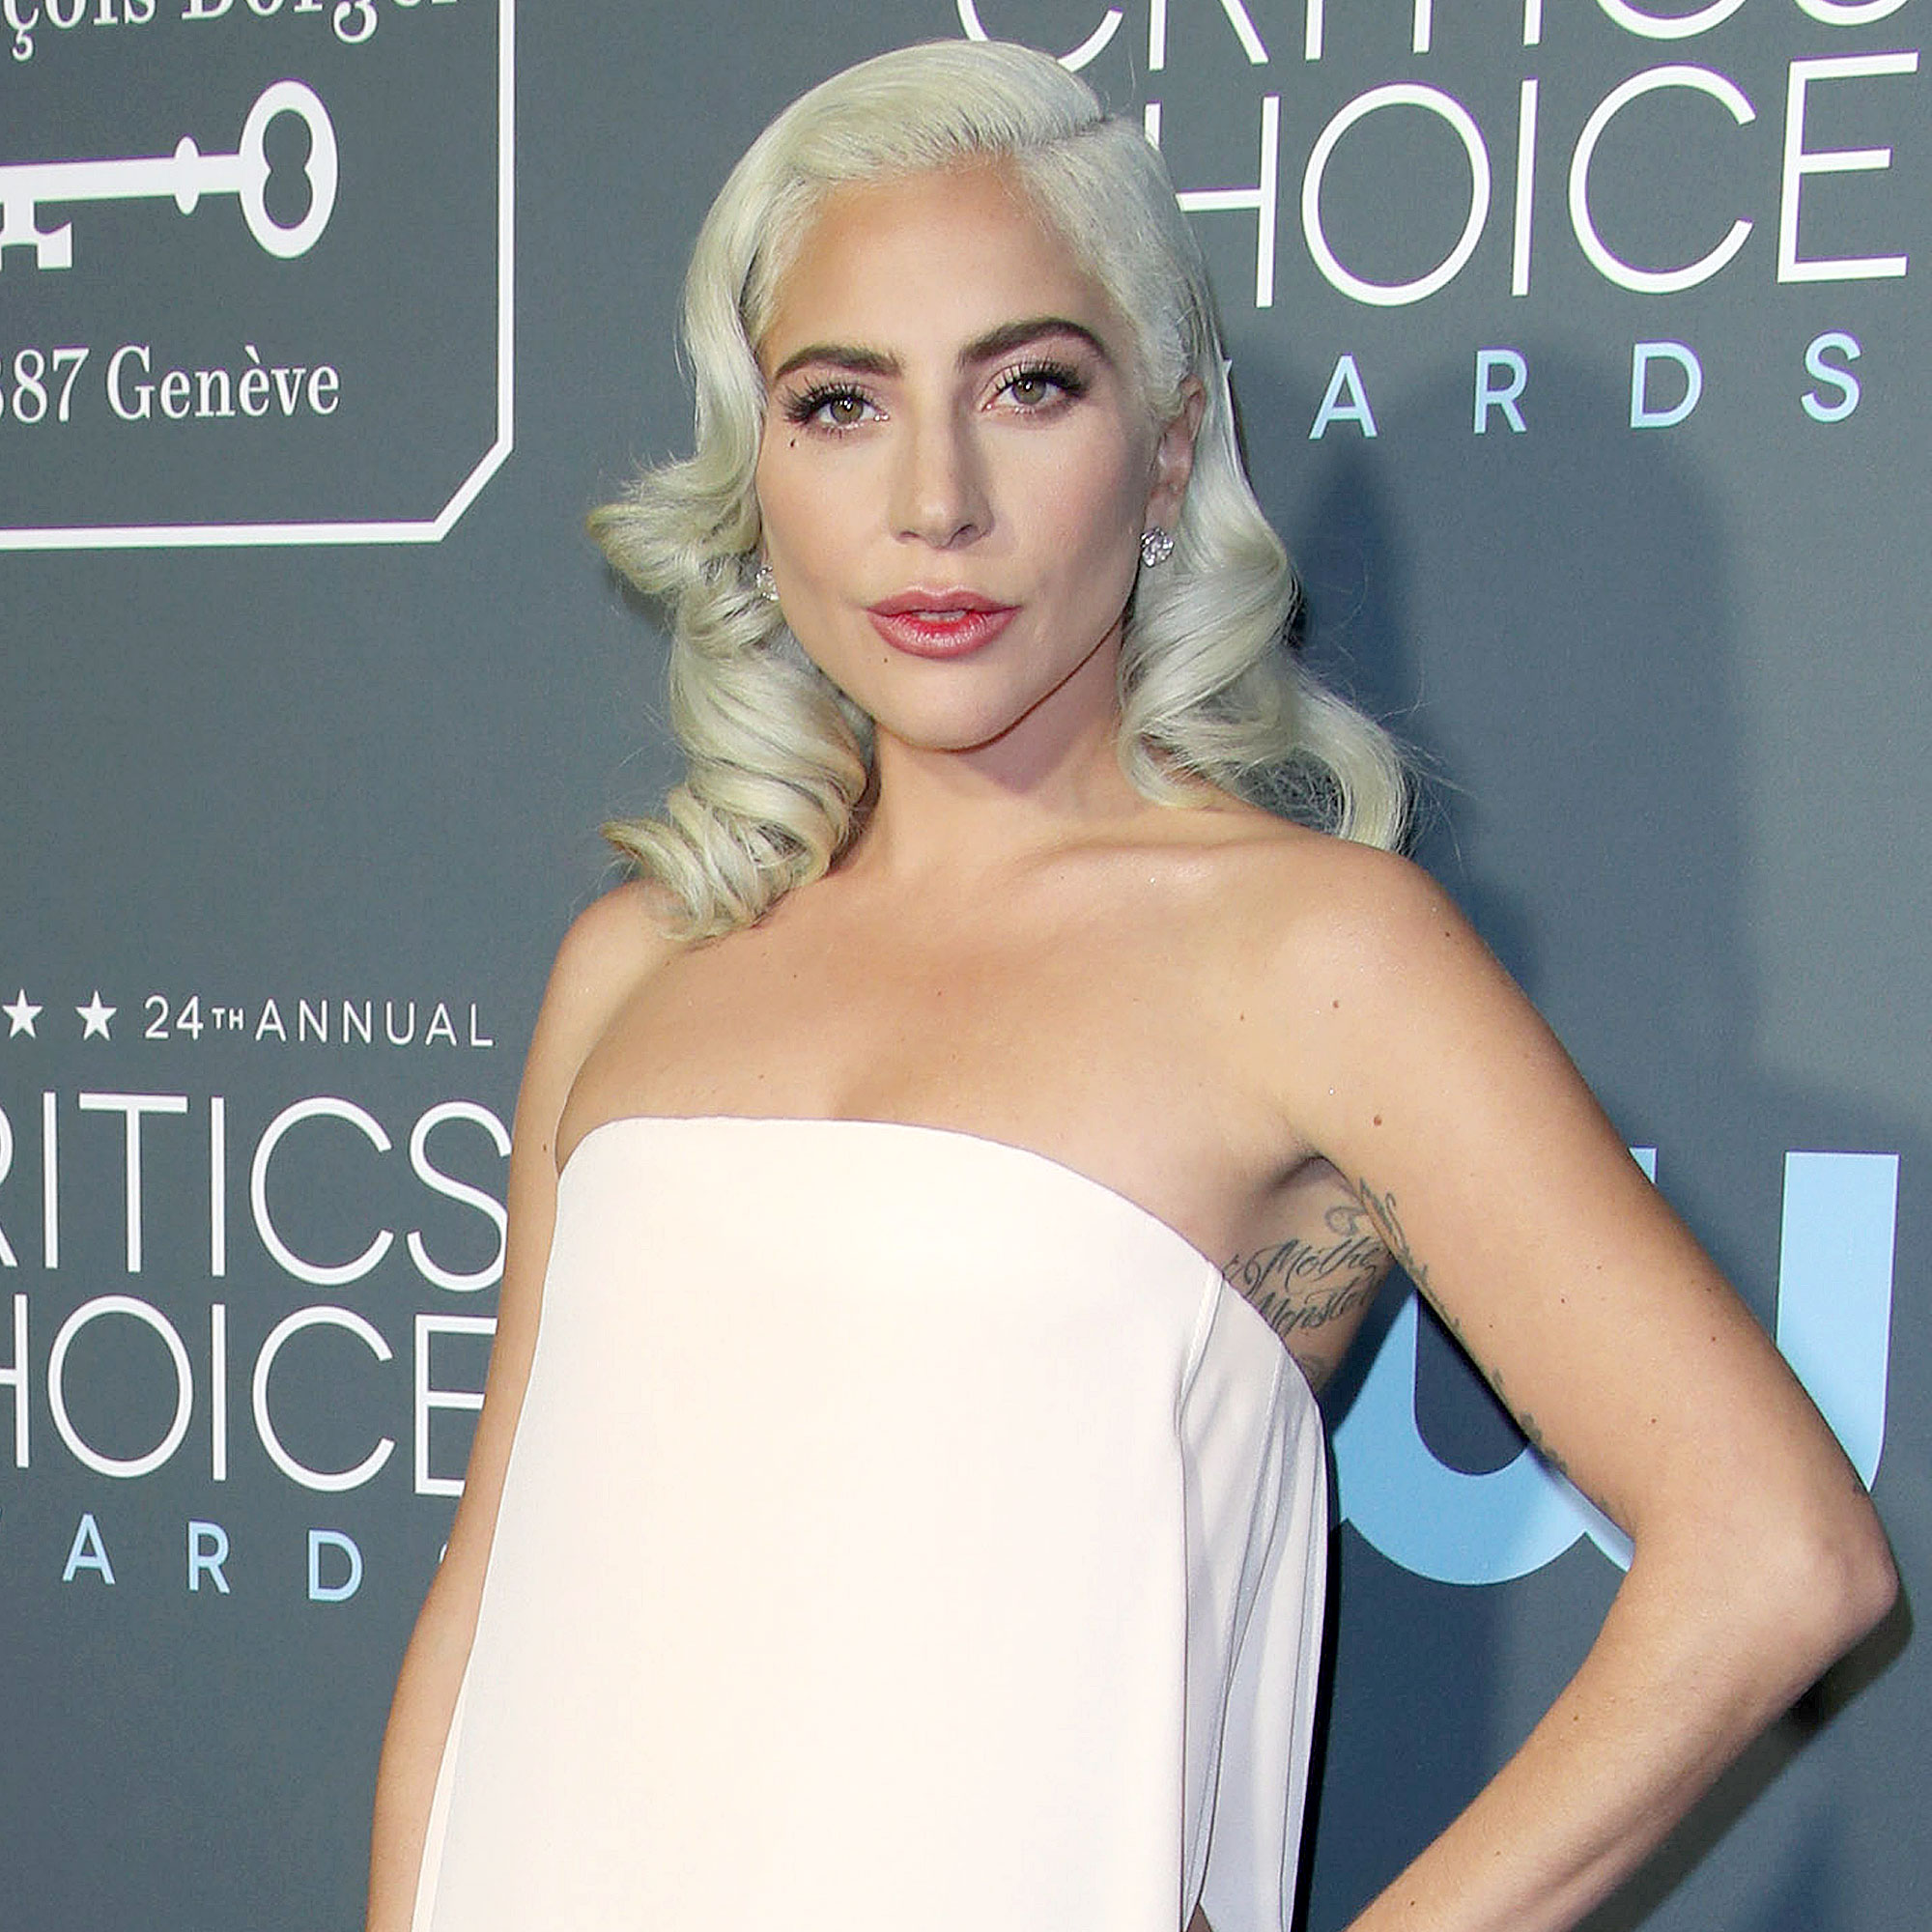 Www Pregnent Anty Rep Sex - Lady Gaga Reveals She Was Pregnant After Past Sexual Assault